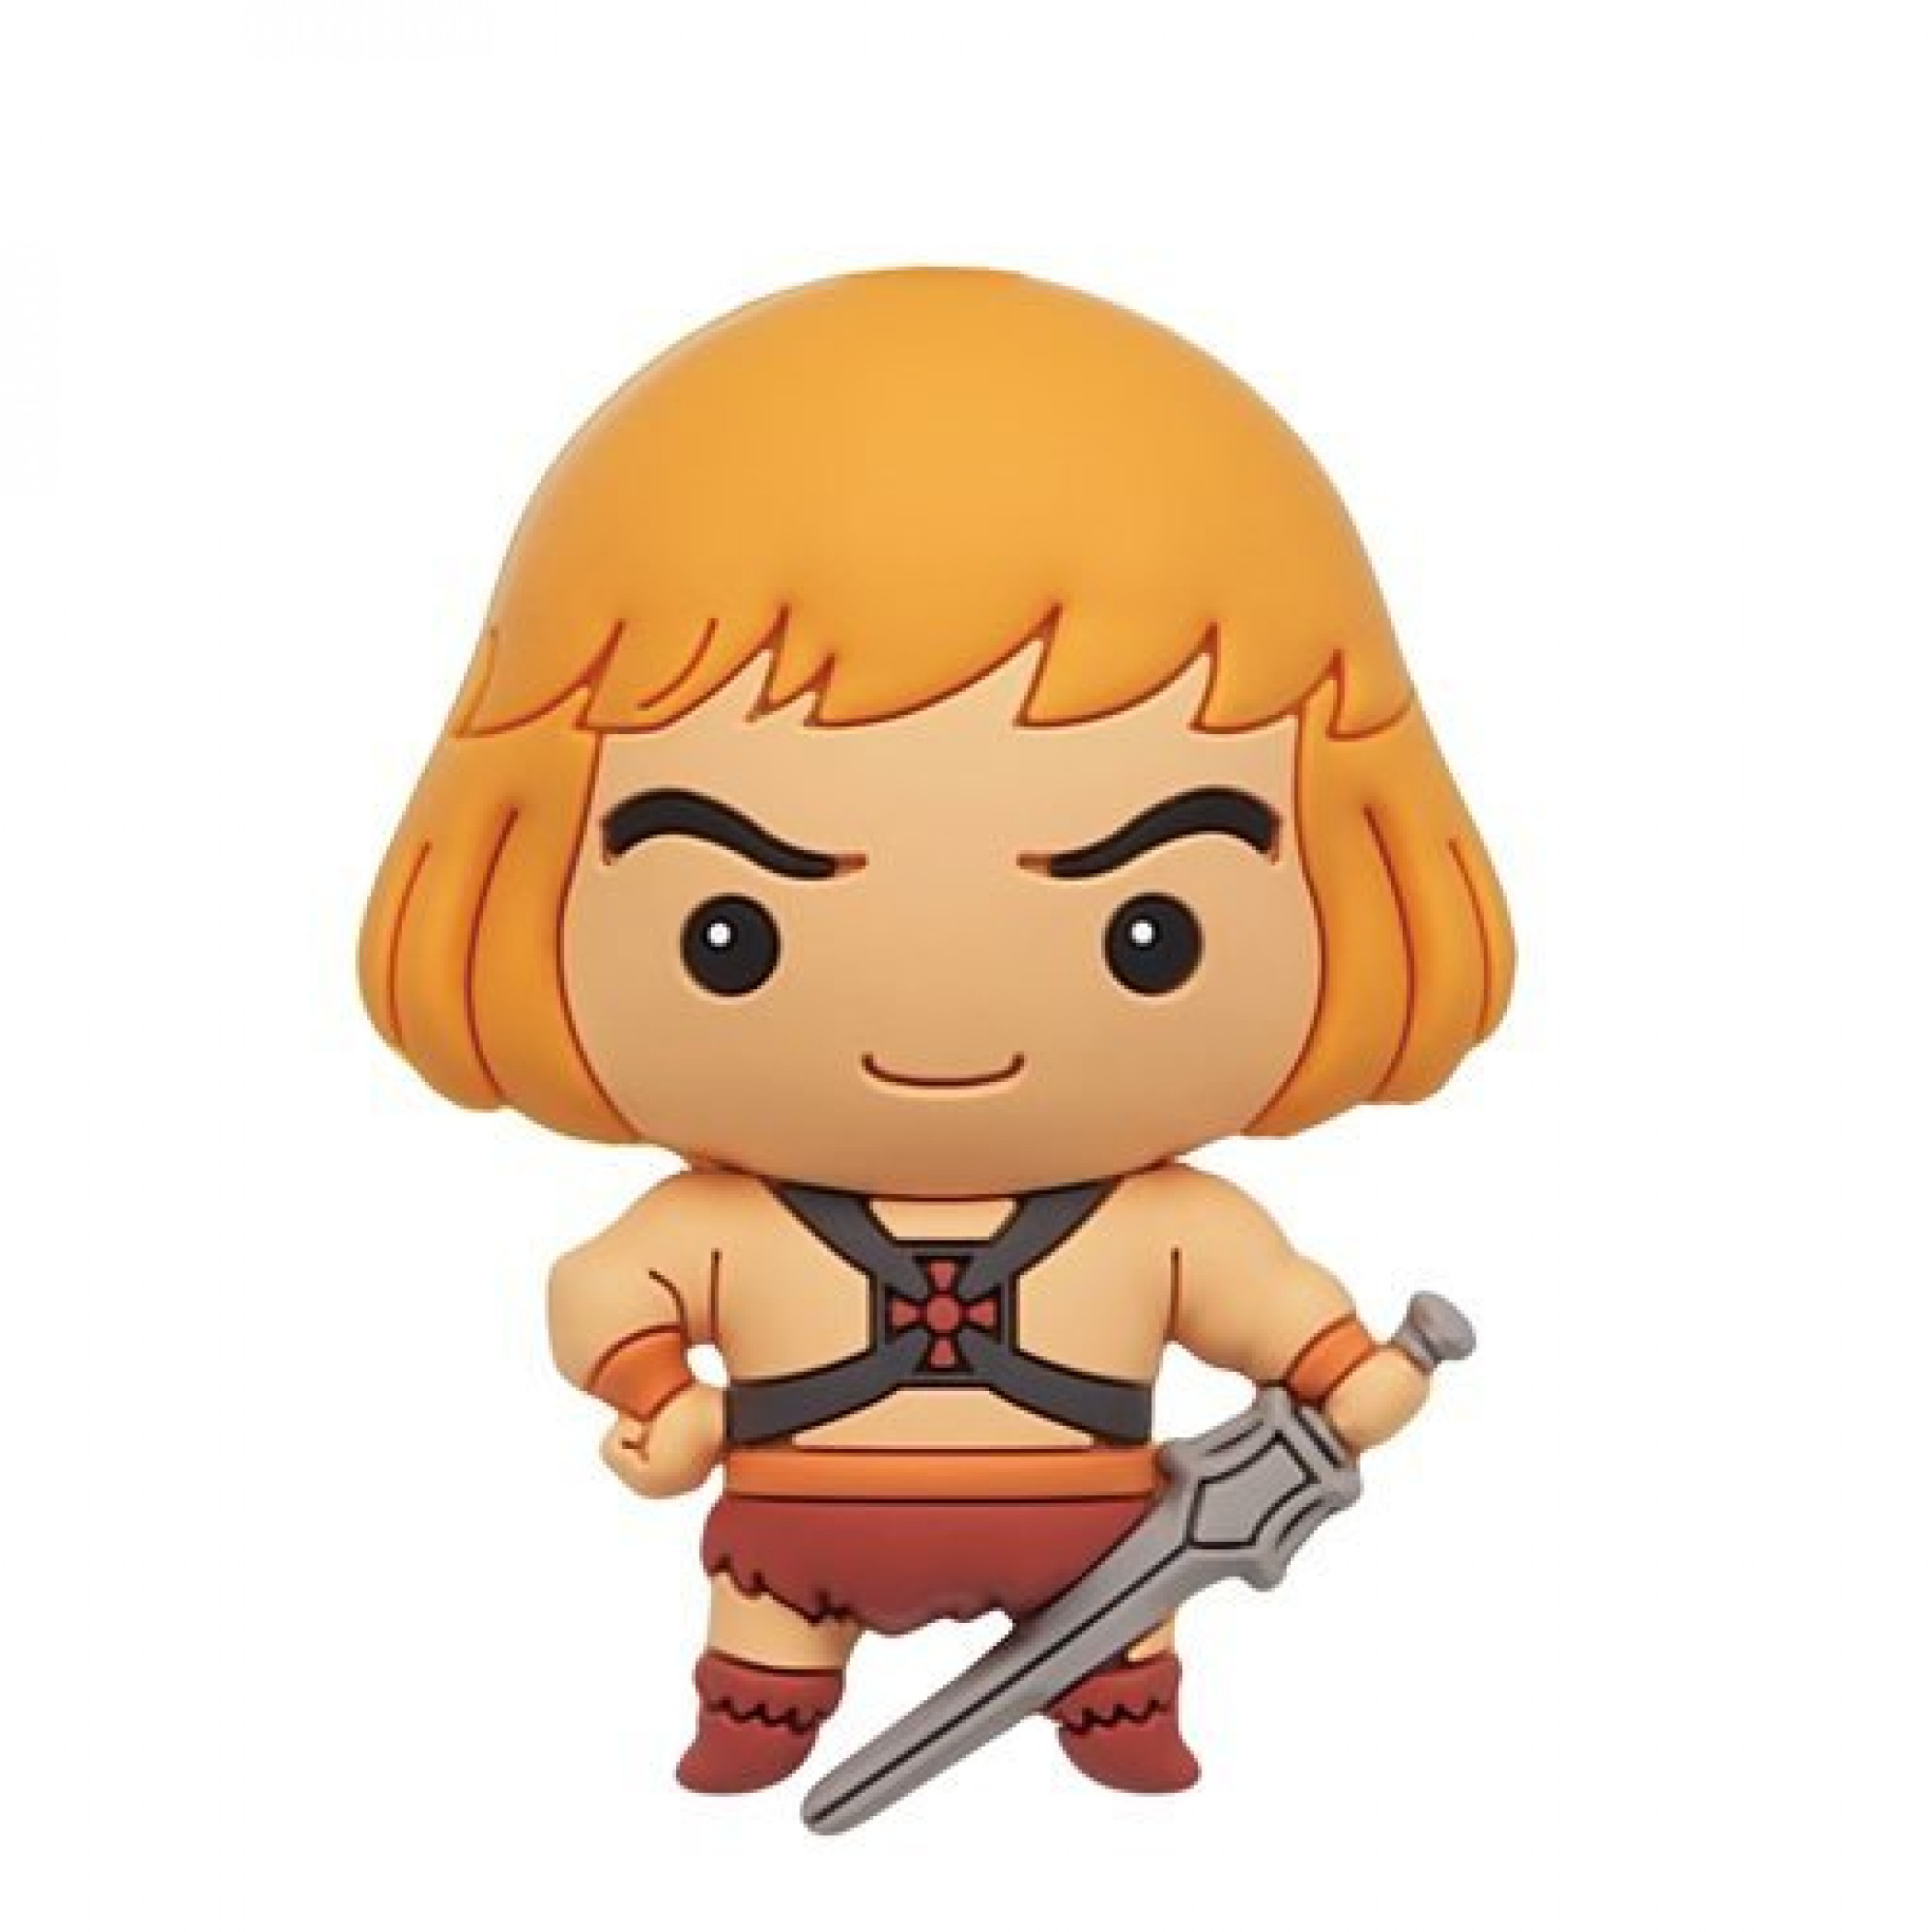 He-Man Masters of the Universe Chibi Character 3D Foam Magnet